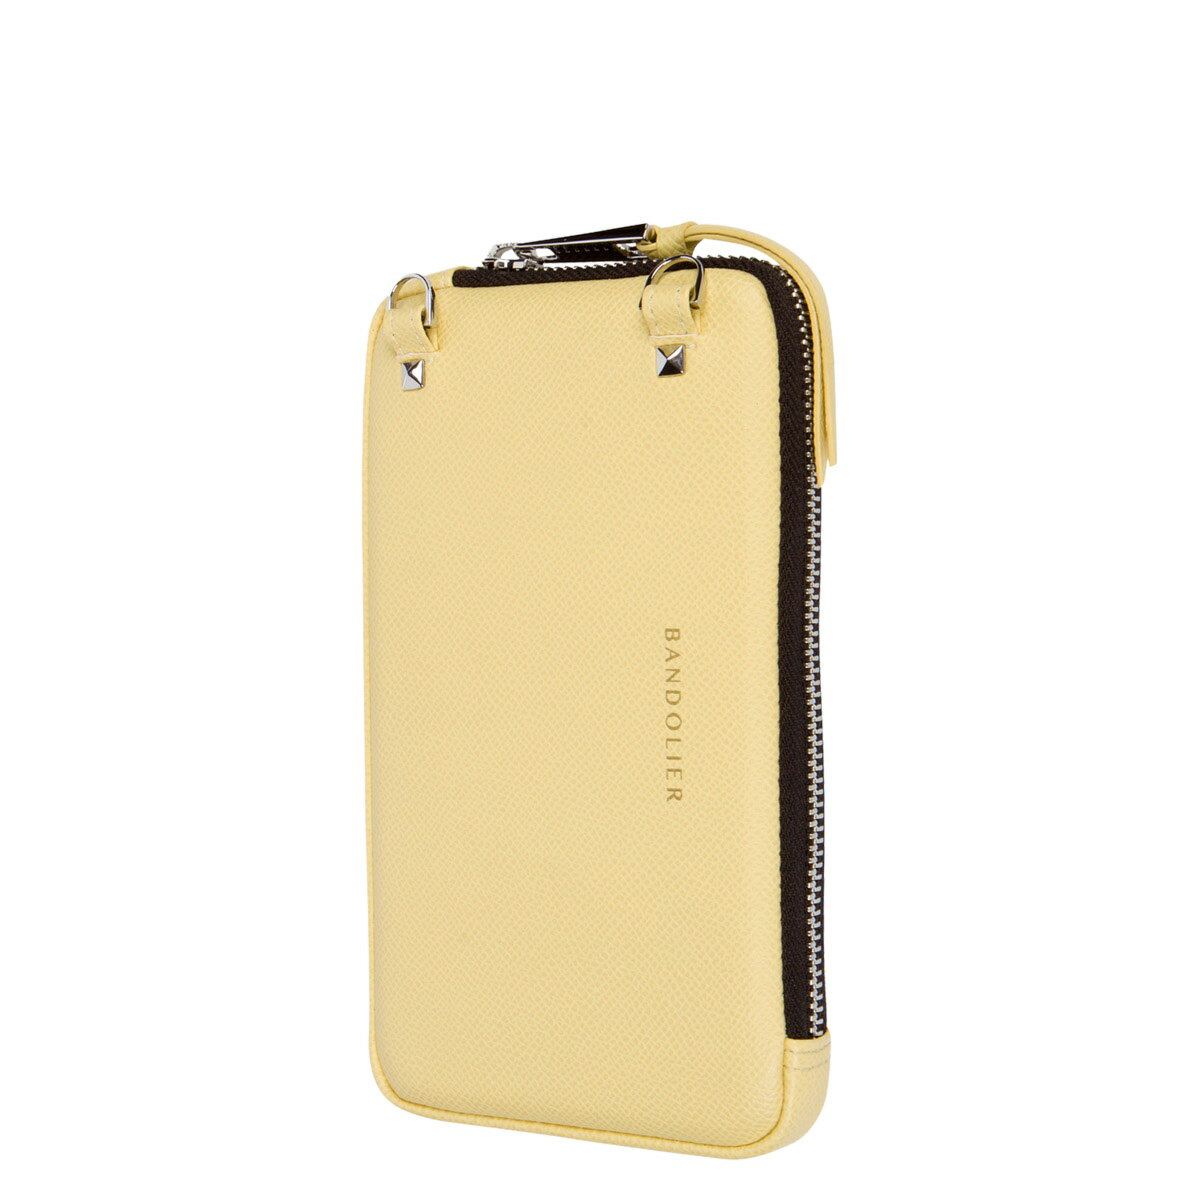 BANDOLIER EXPANDED BUTTER YELLOW POUCH バンドリヤー ポーチ スマホ 携帯 エキスパンデッド ポーチ メンズ レディース イエロー 21GRA14